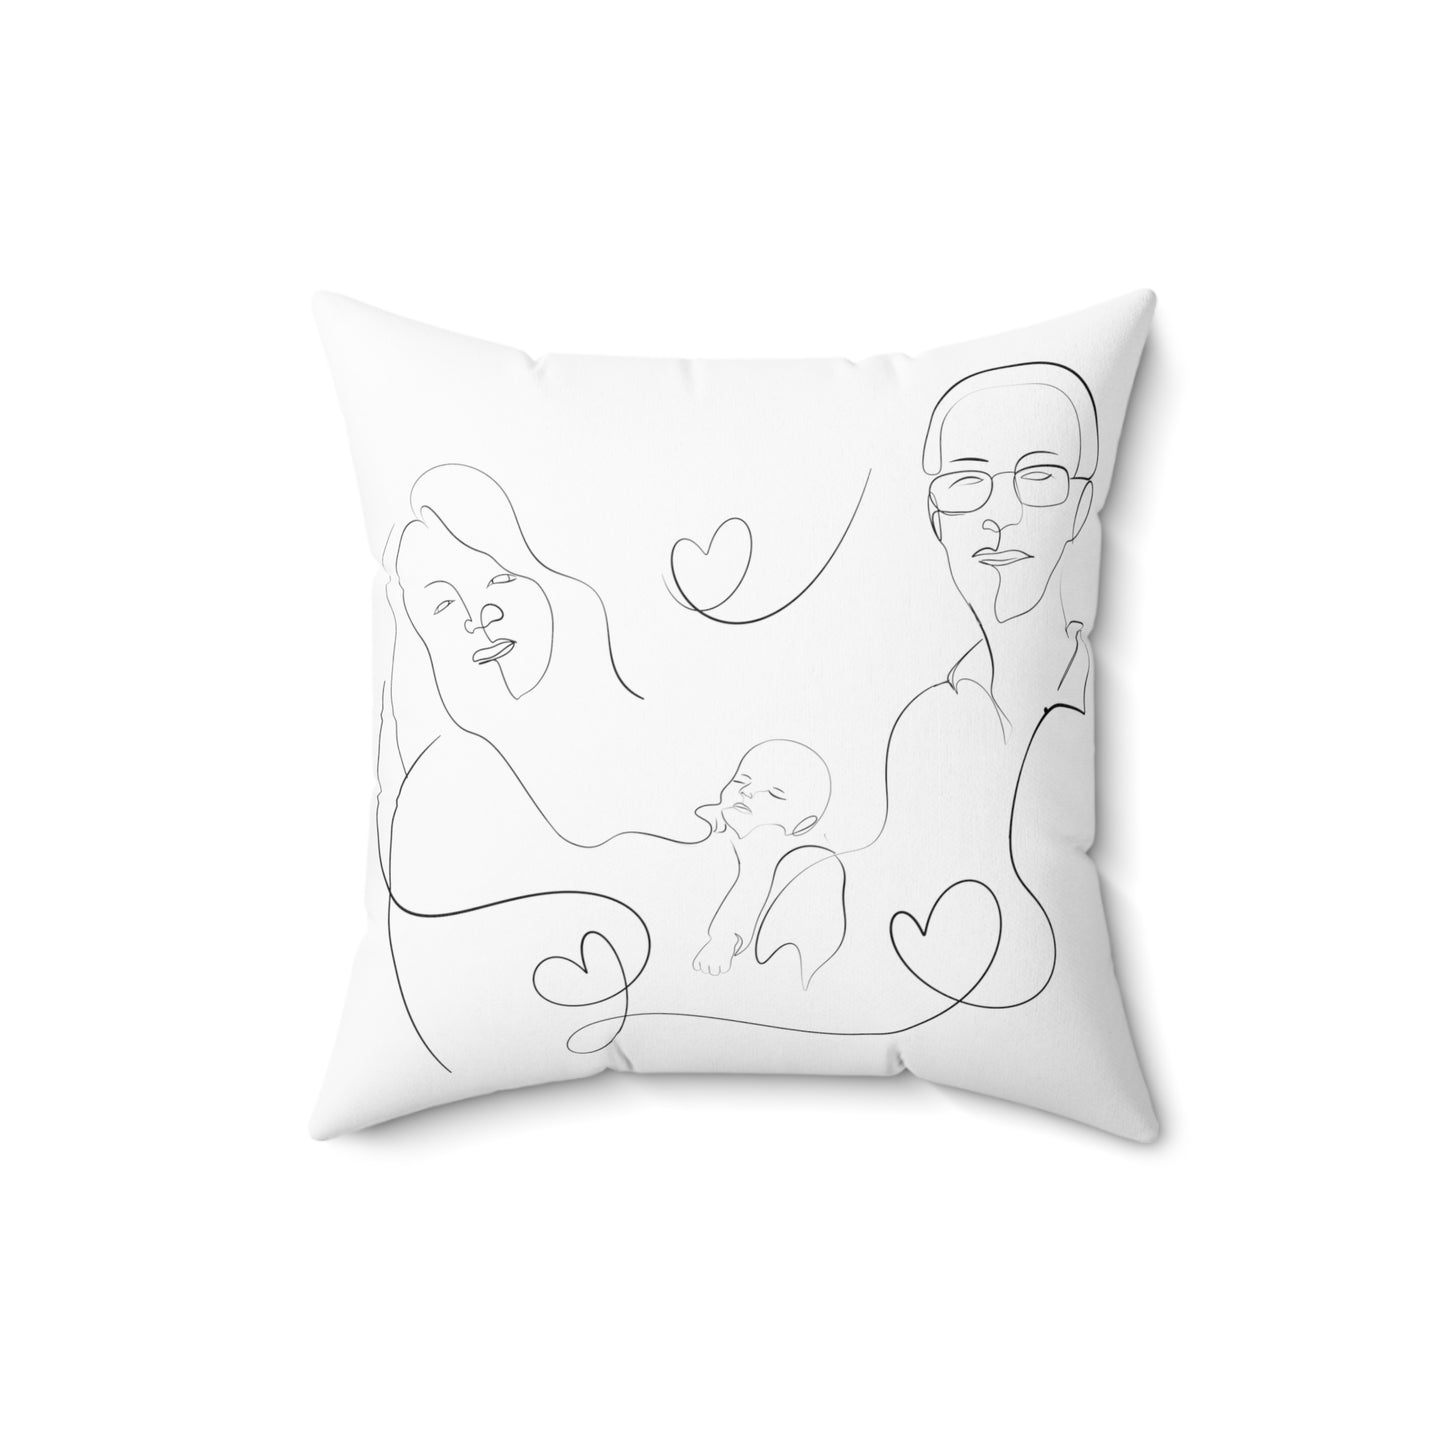 Personalize your Square Pillow